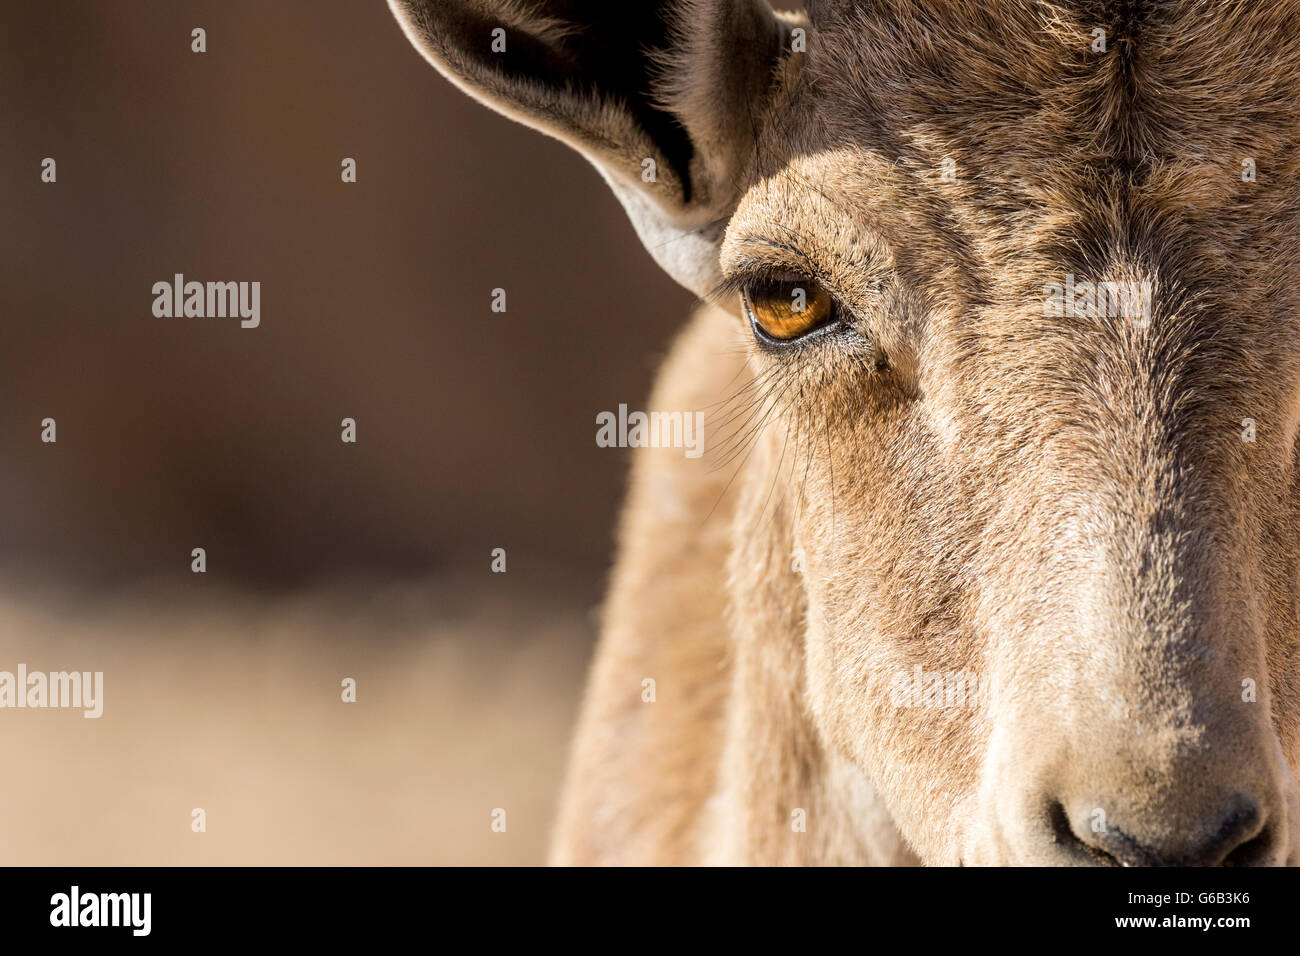 Abstract close up of eye and head of endangered Nubian Ibex Capra nubiana with diffuse background Eilat Mountain Israel Stock Photo